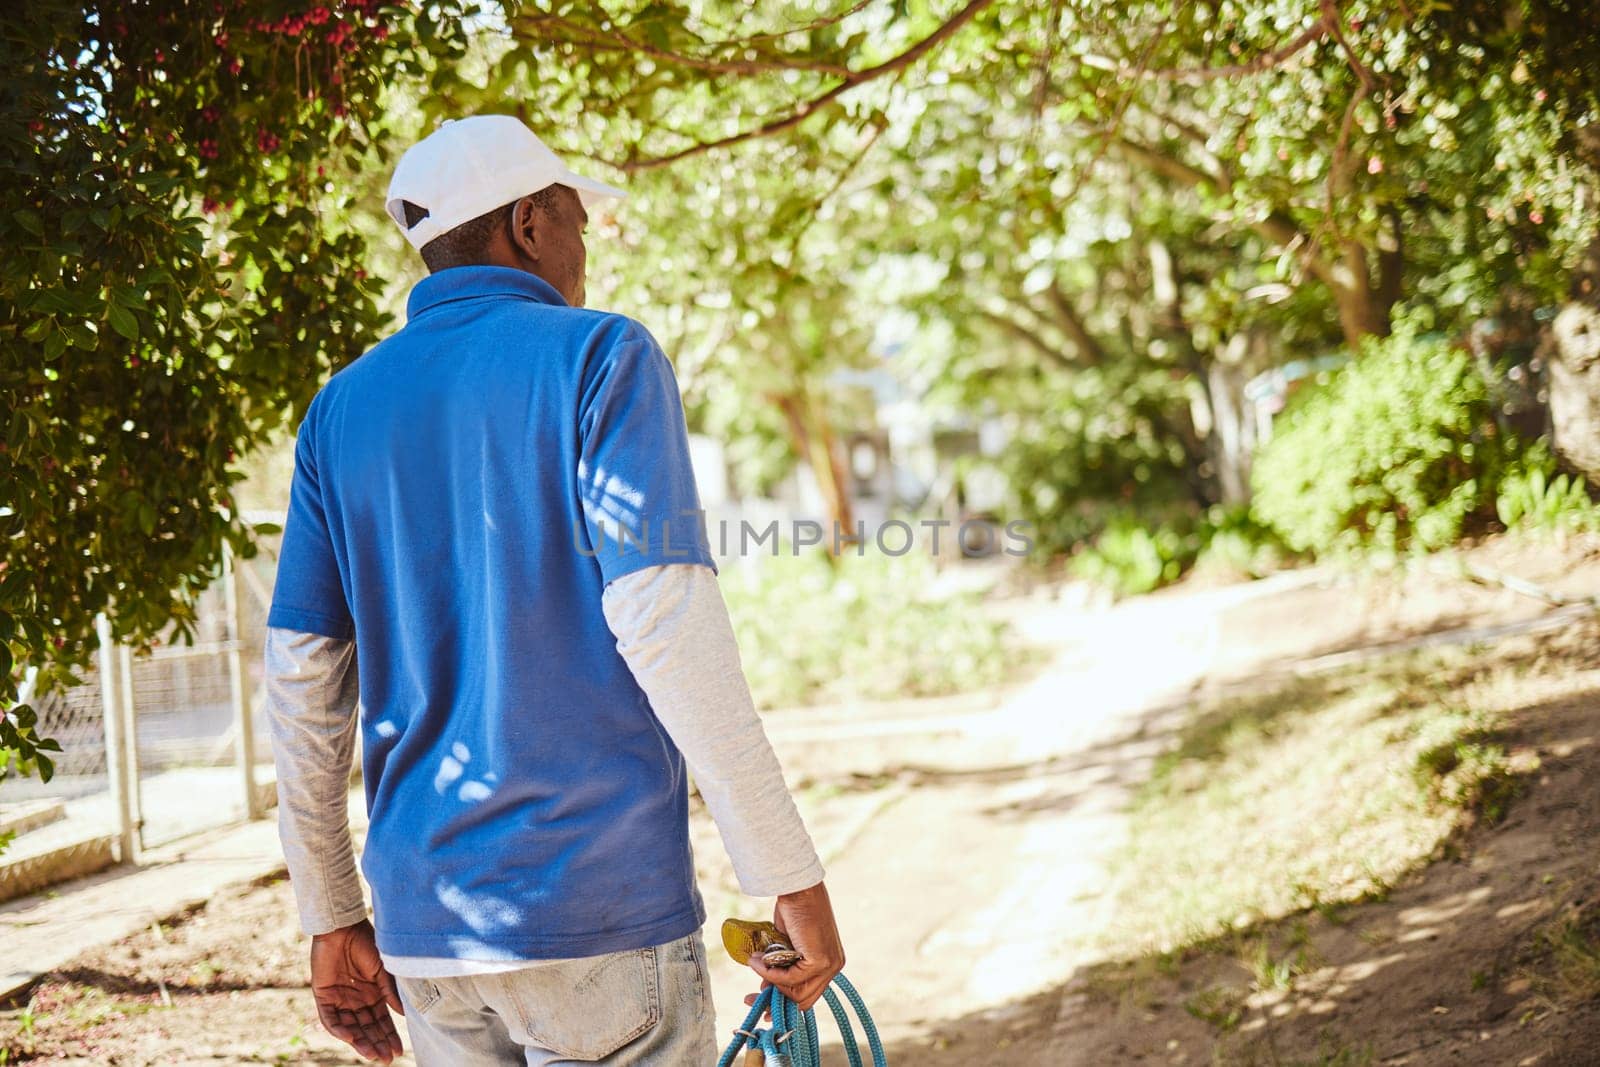 Outdoor animal shelter, cleaning and worker with hose walking in nature to clean for volunteer work. Community, charity and black man working at rescue center for dogs, animals and adoption of pets.